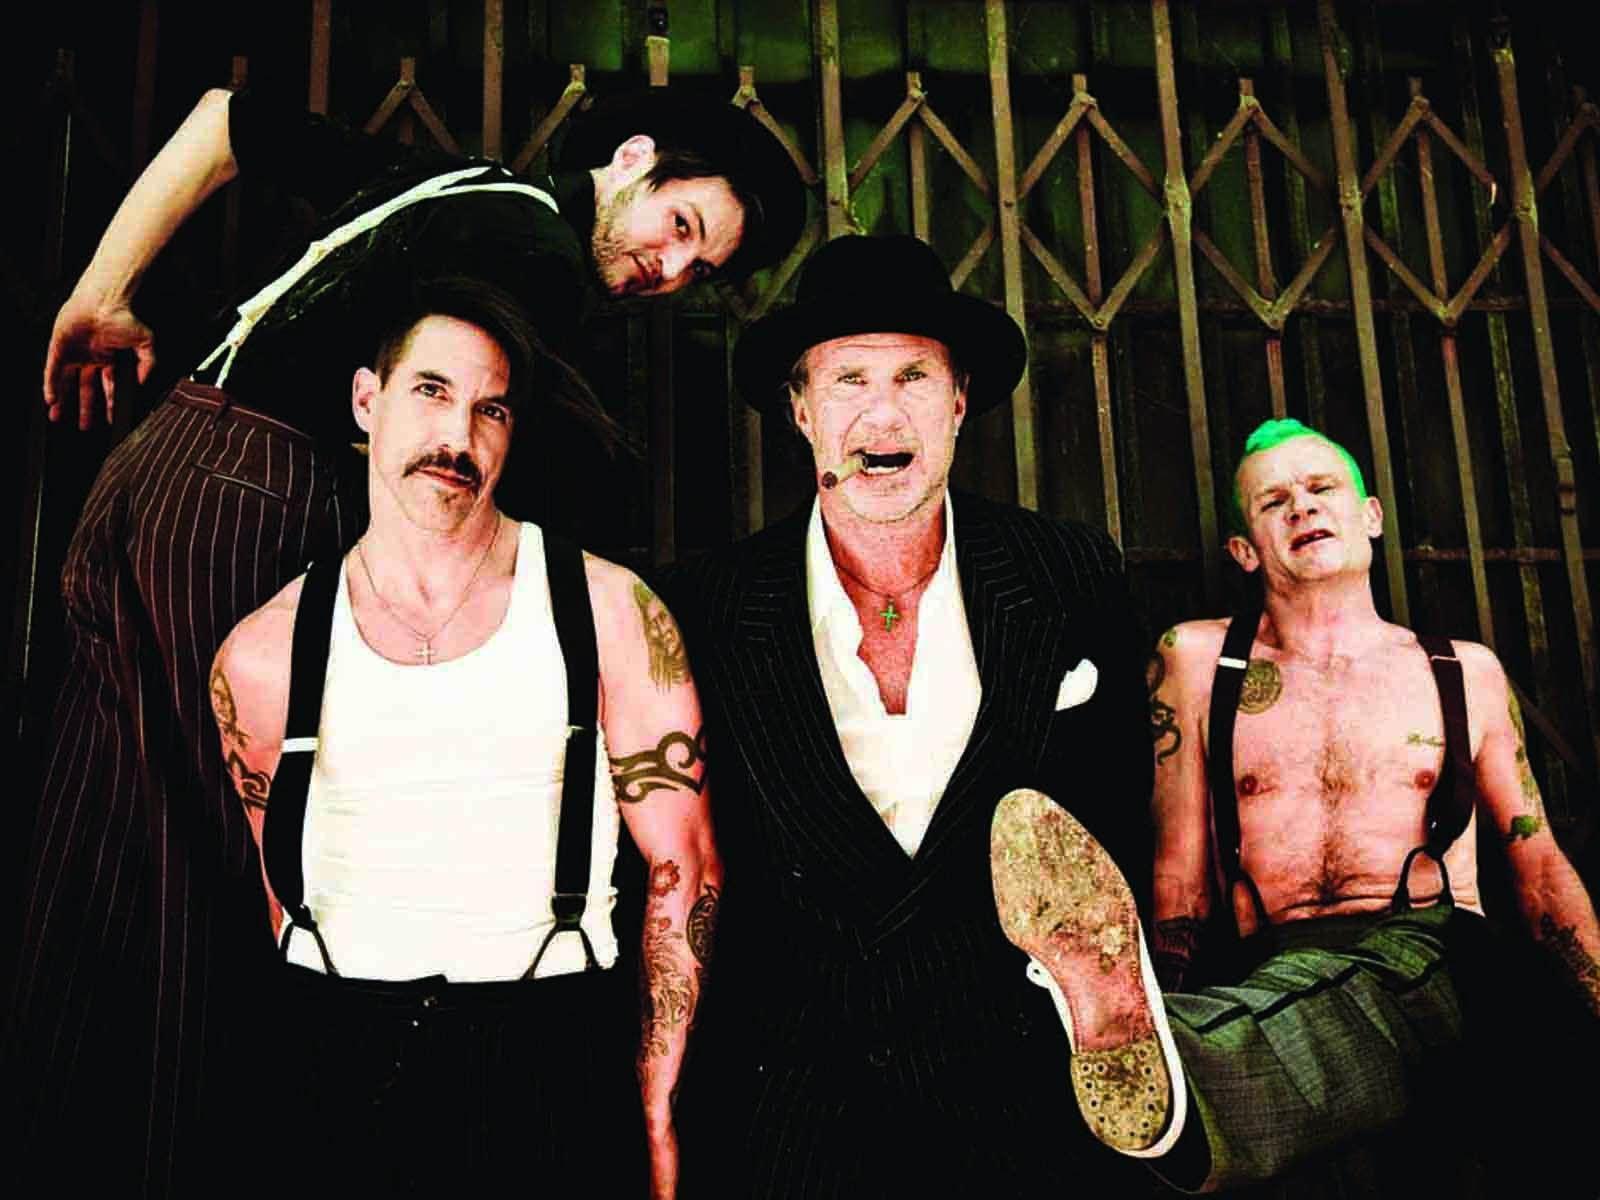 Wallpaper Red Hot Chili Peppers 1600x1200 #red hot